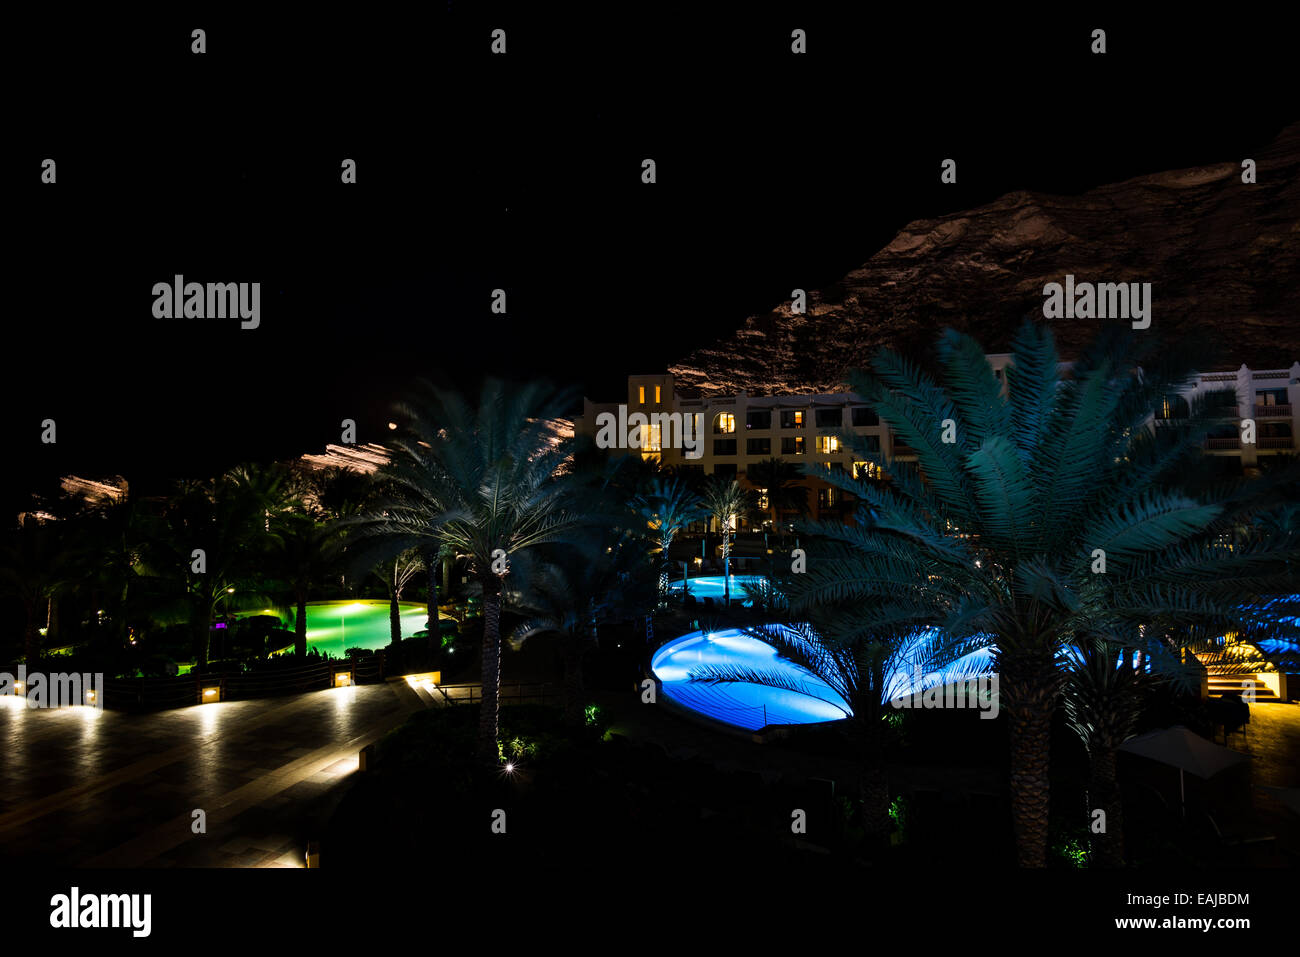 Night scene with colorful pools at a luxury resort. Oman. Stock Photo